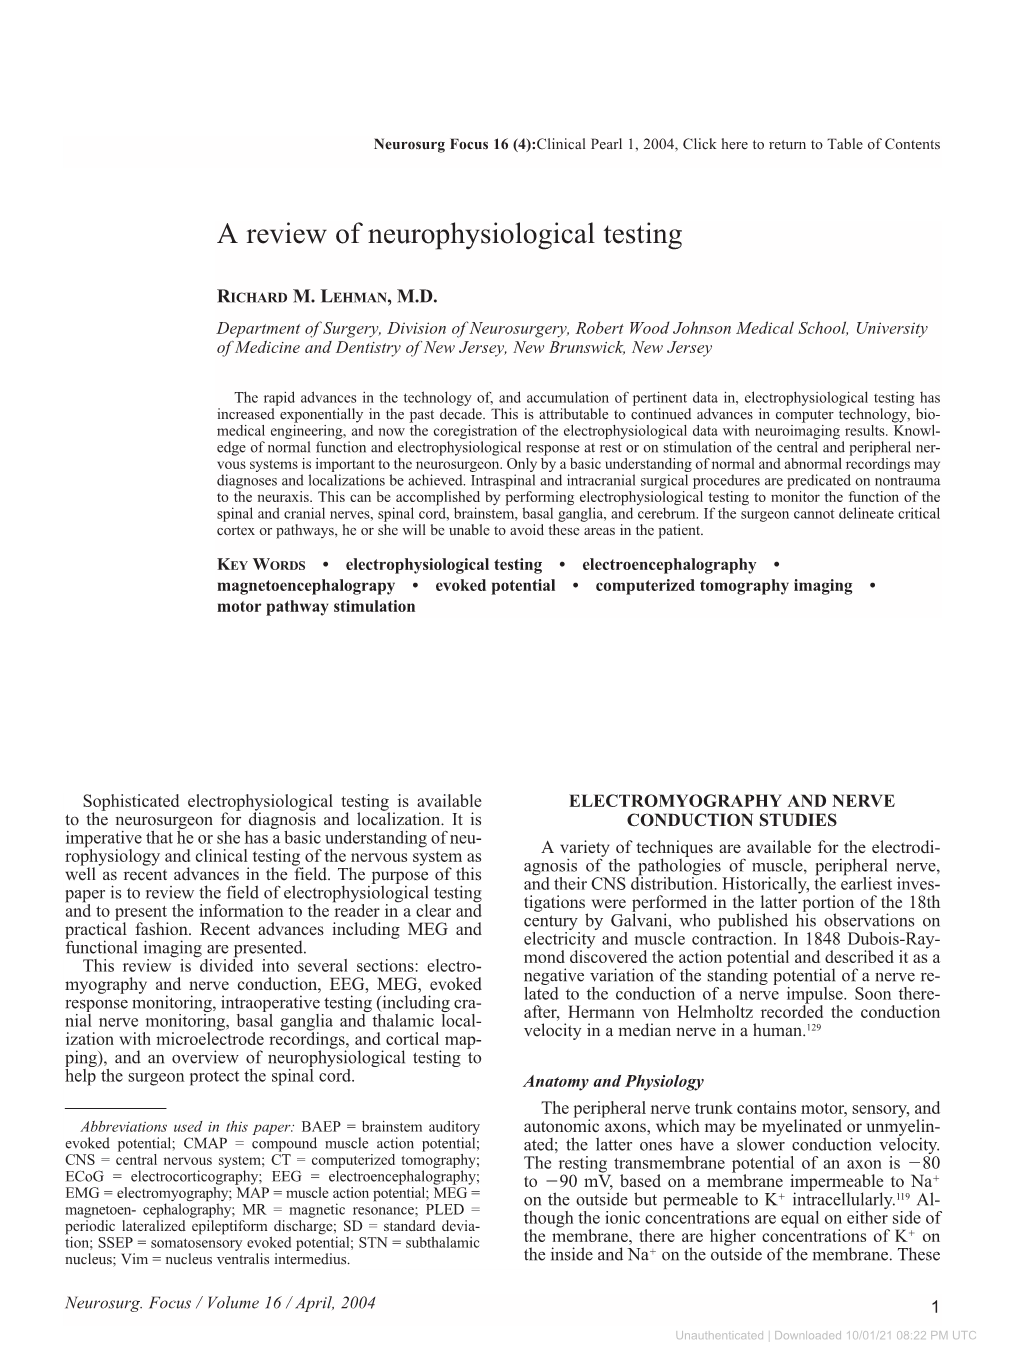 A Review of Neurophysiological Testing